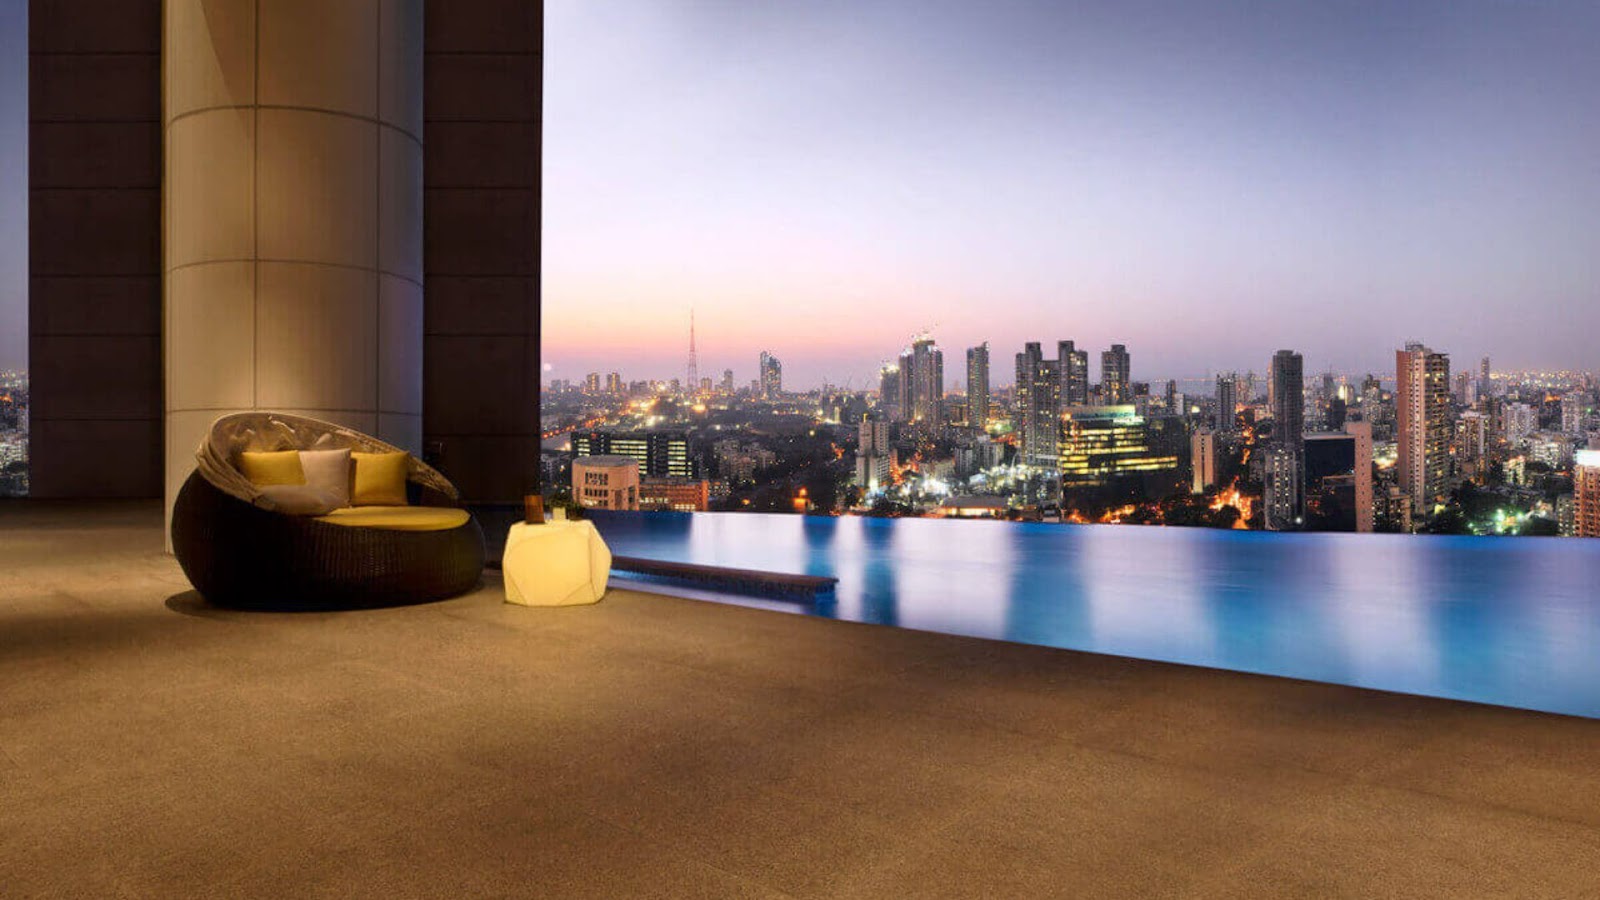 Live the legendary life in Indiabulls Sky Forest Tower 1